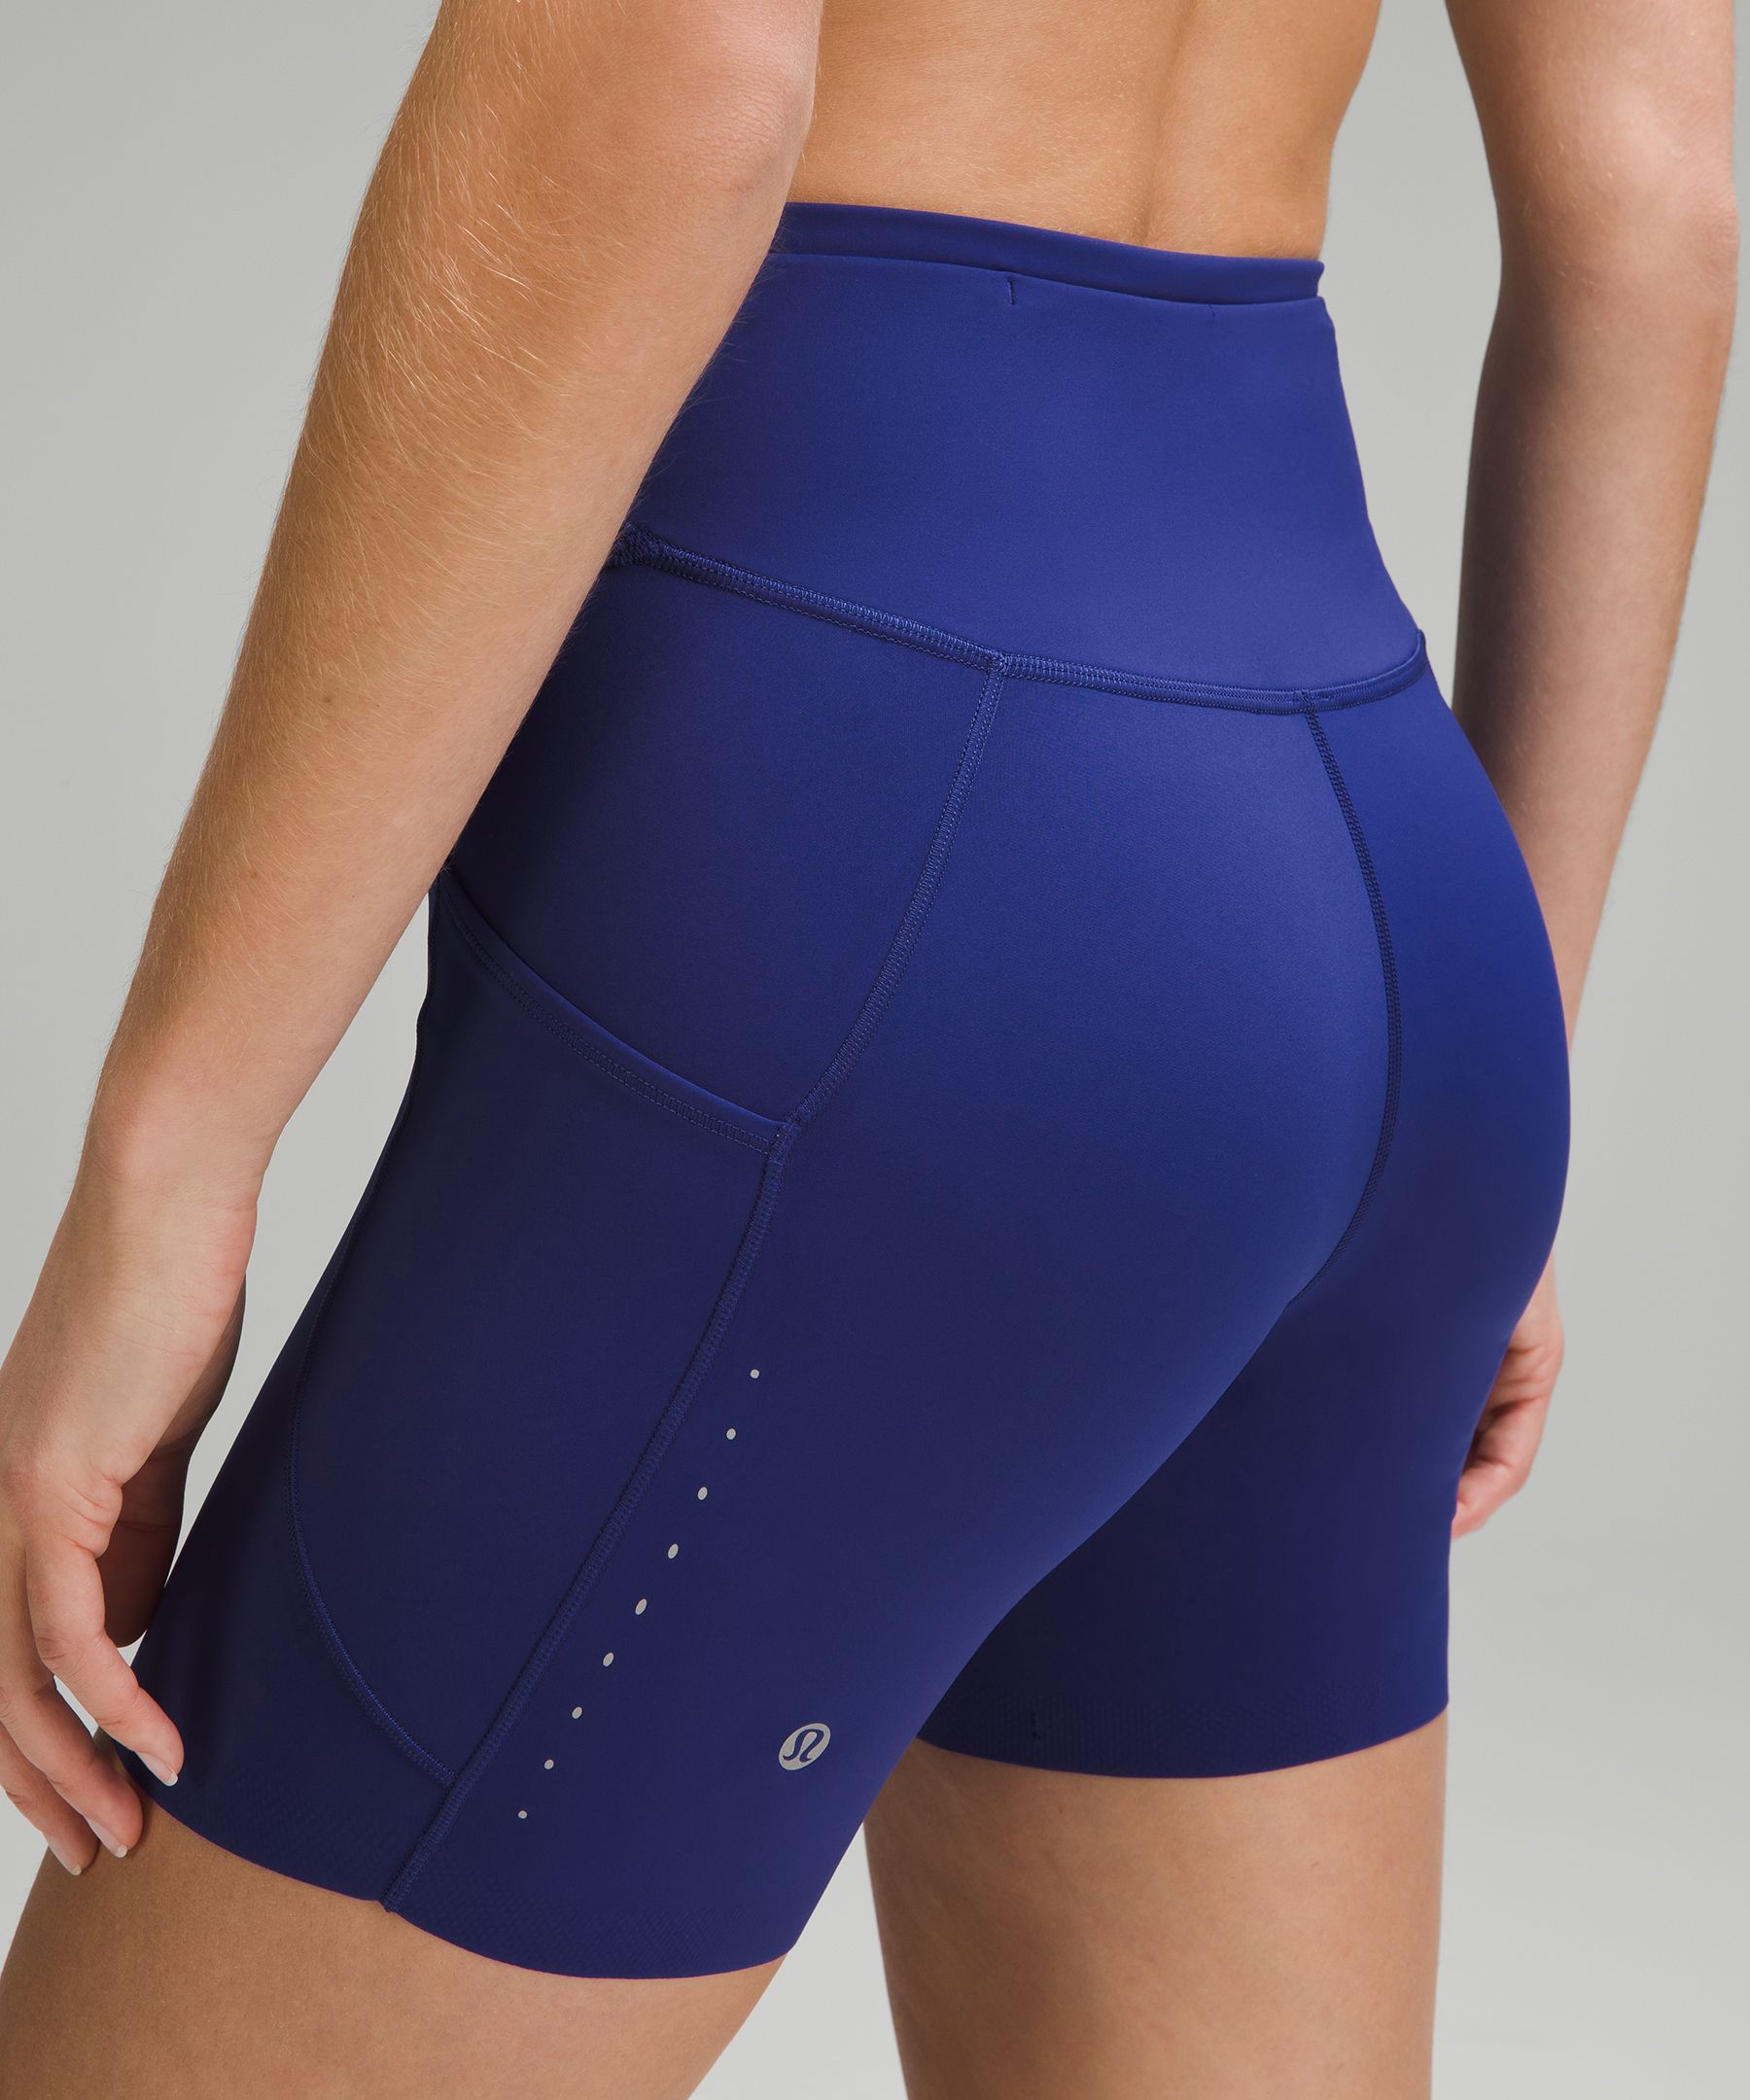 Fast and Free High-Rise Short 6 *Pockets, Women's Shorts